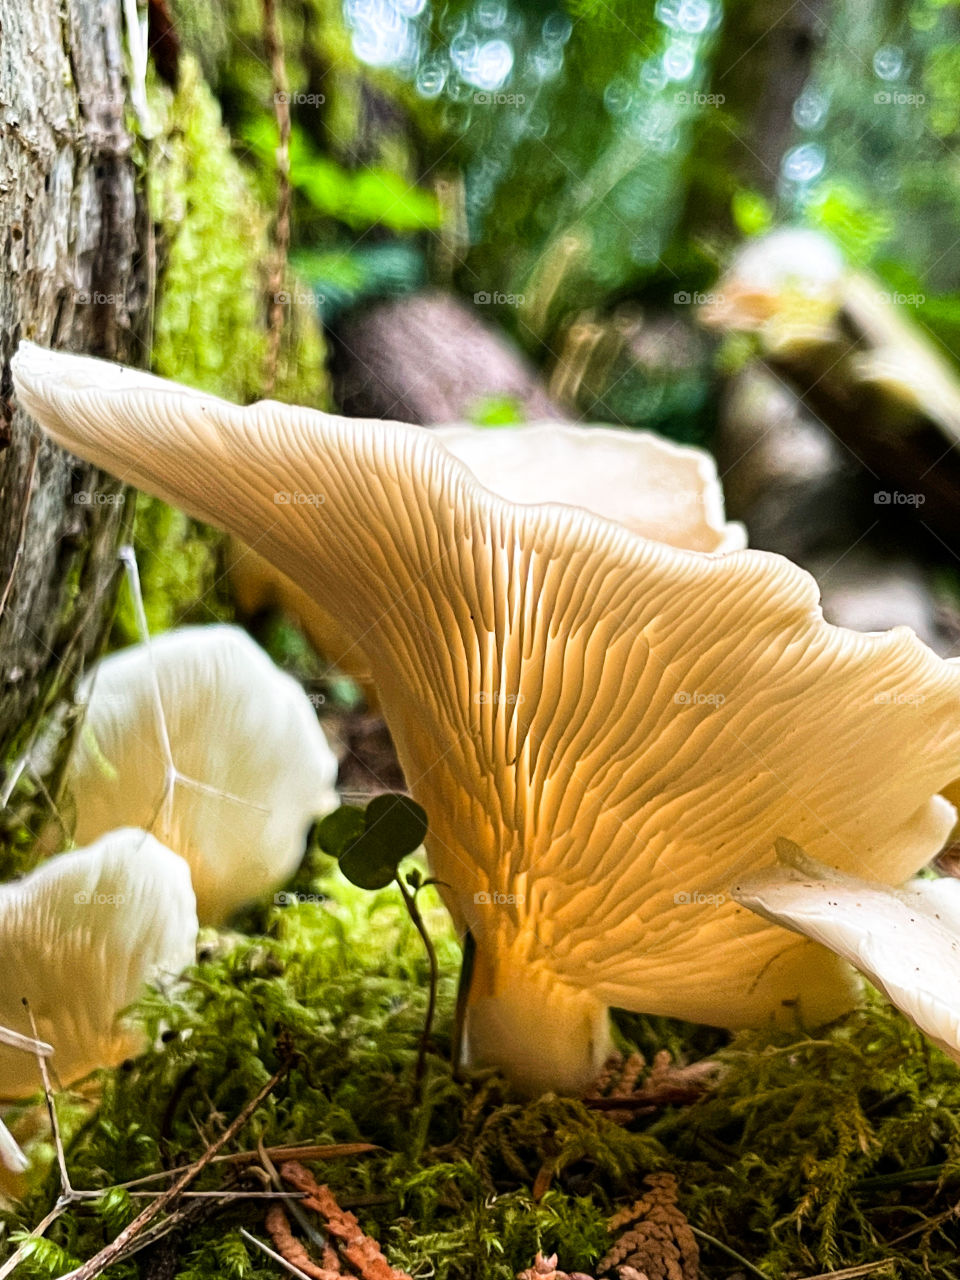 White mushrooms in the green forest 